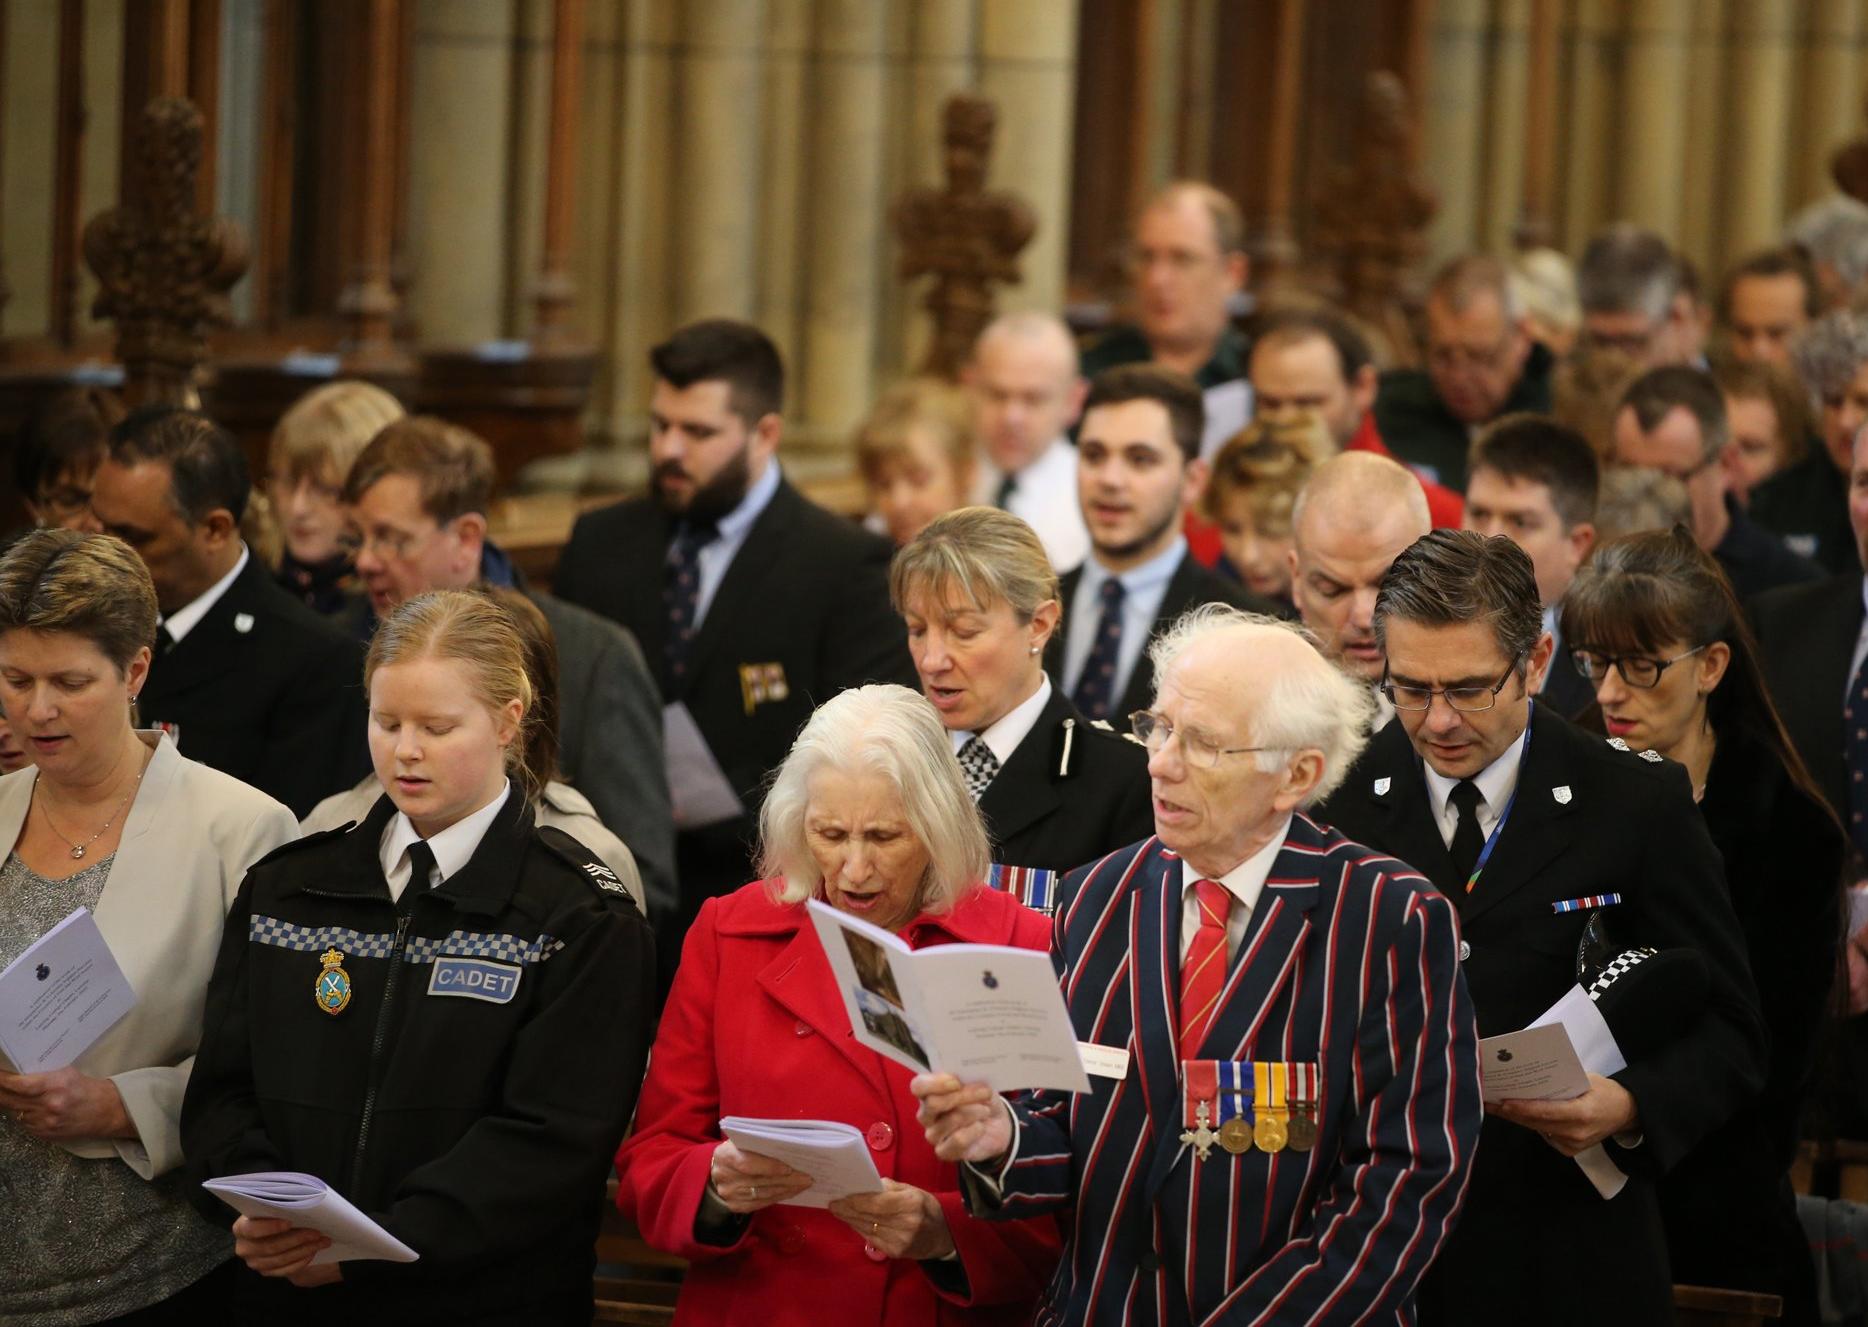 More than 400 emergency services staff came together today for the Blue Light Service at Lancing College Chapel